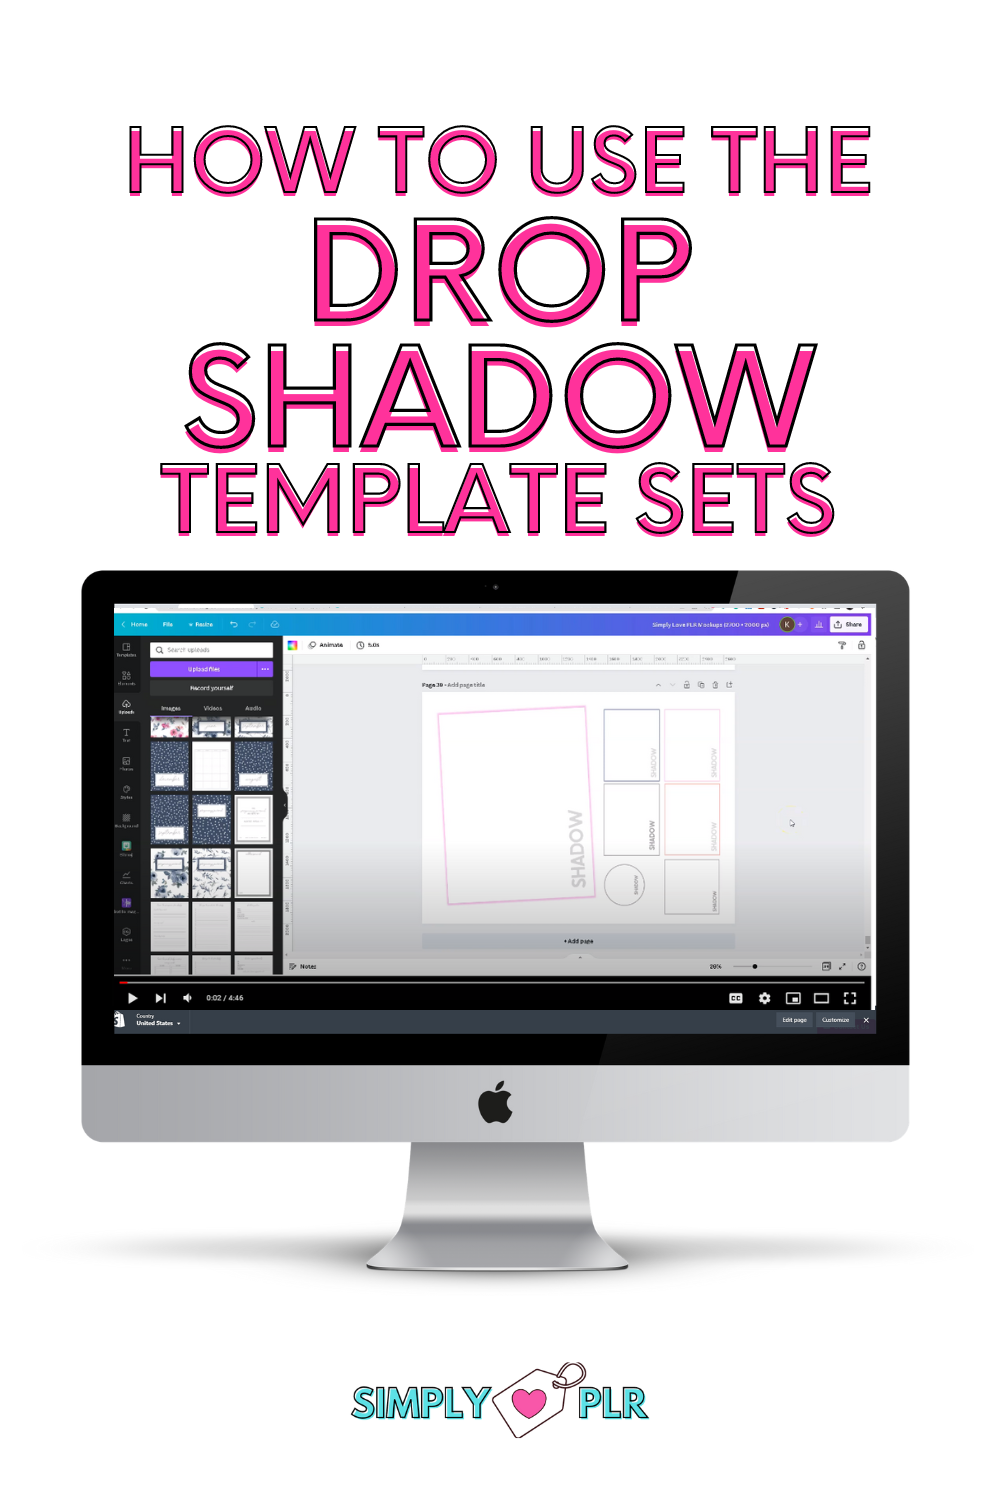 Simply Love PLR HOW TO USE THE drop shadow TEMPLATE SETS